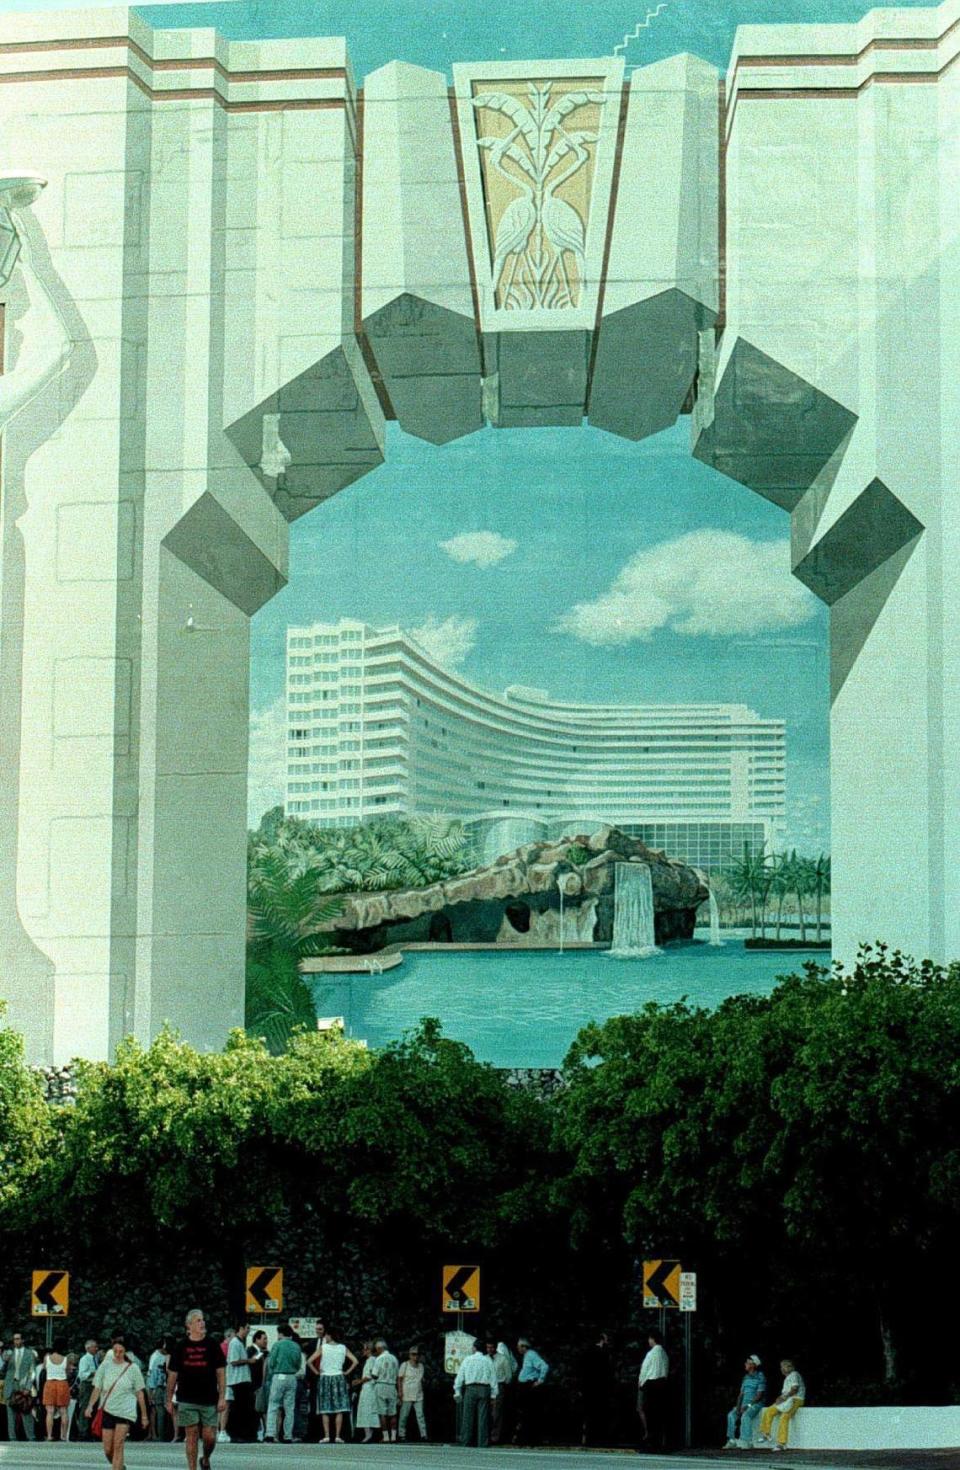 In 1997, the landmark mural on the wlal of a building that creates an illusion of looking through an arch to the hotel beyond. A group protested at the base of the mural to protest its removal to make way for a new hotel tower.